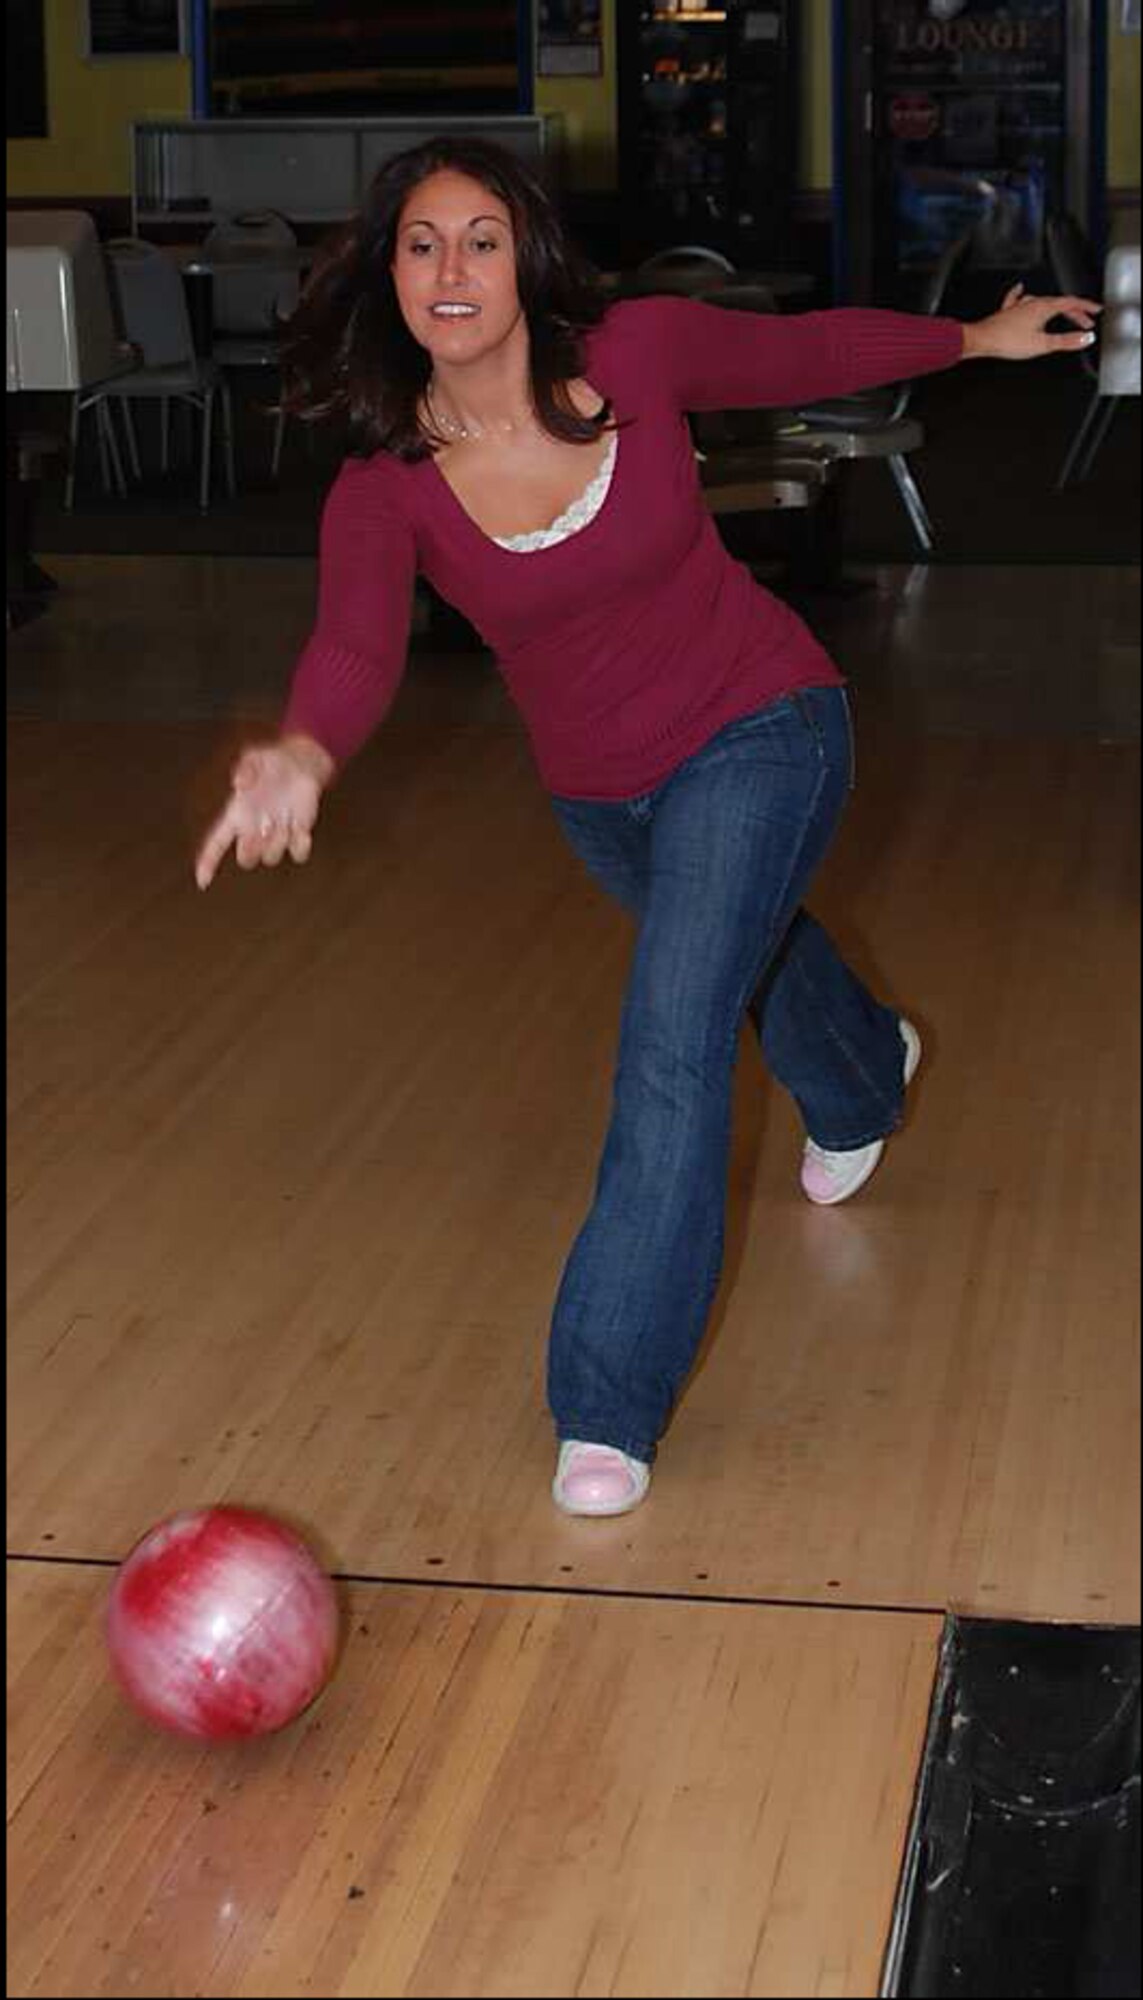 Technical Sergeant Brandi Wallace bowls at the Tropicana Bowling Center, St. Louis, Mo., May 11.